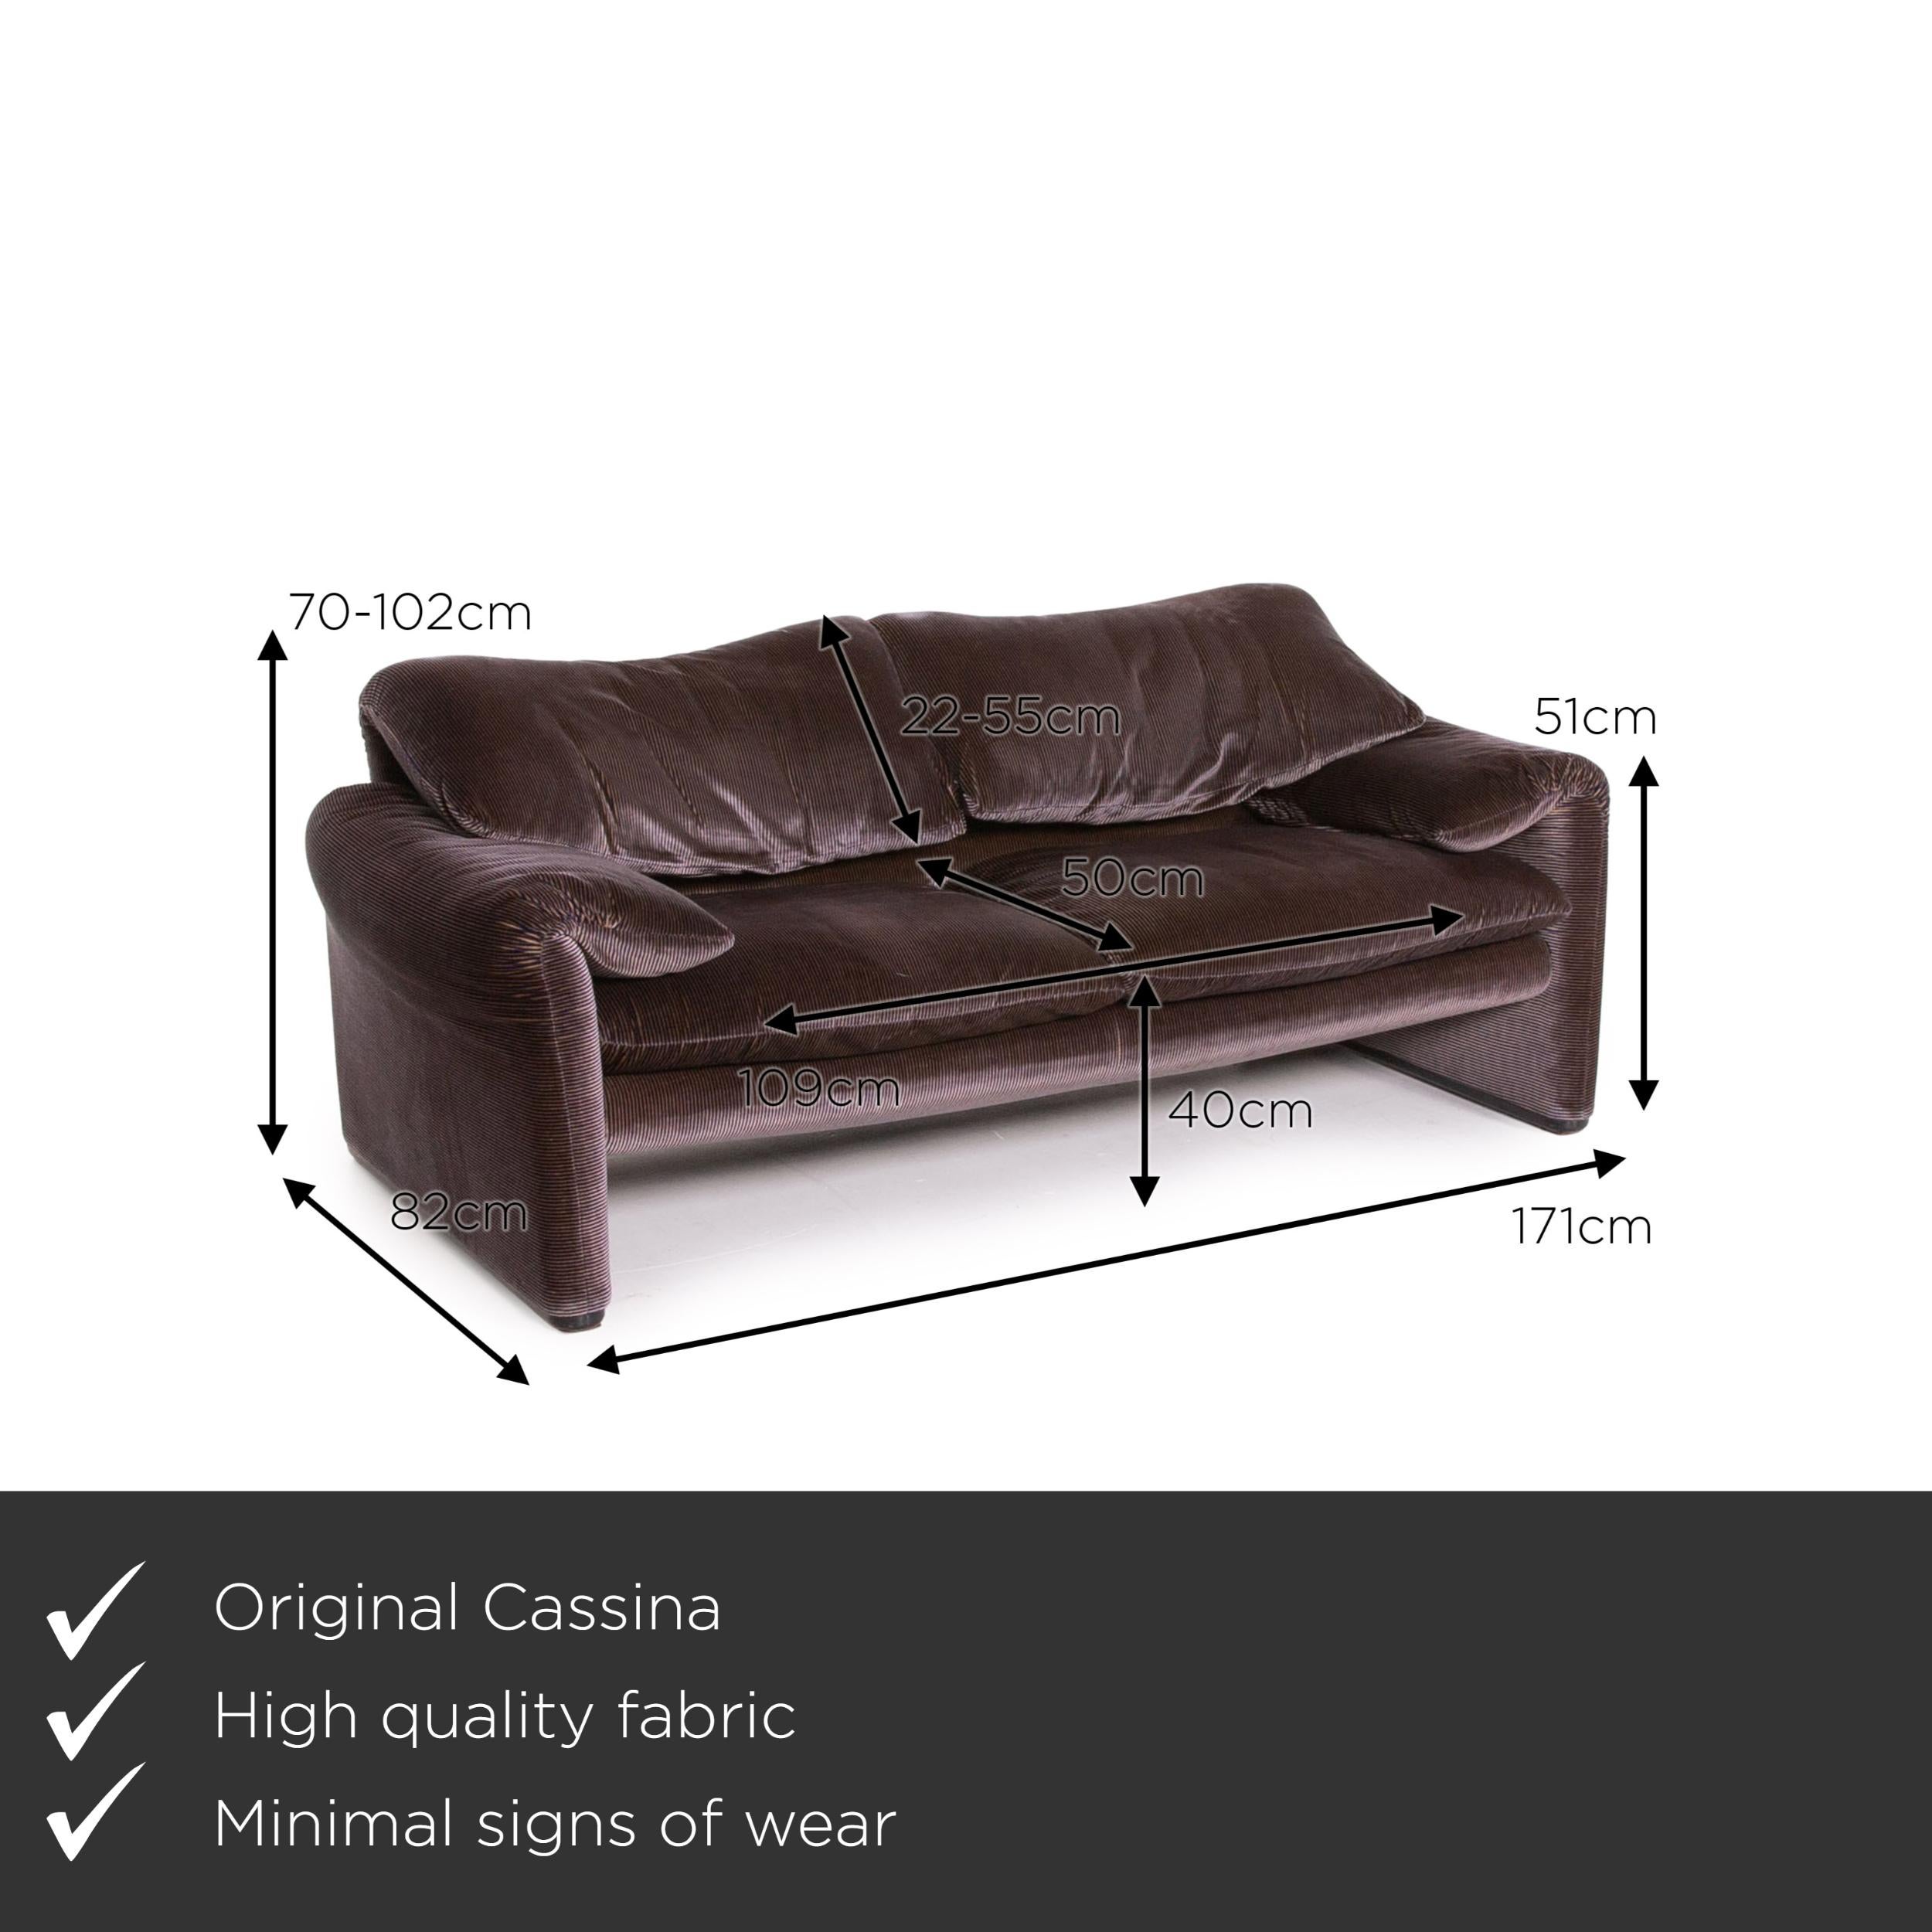 We present to you a Cassina Maralunga fabric sofa purple aubergine three-seat function couch.


 Product measurements in centimeters:
 

Depth 82
Width 171
Height 70
Seat height 40
Rest height 51
Seat depth 50
Seat width 109
Back height